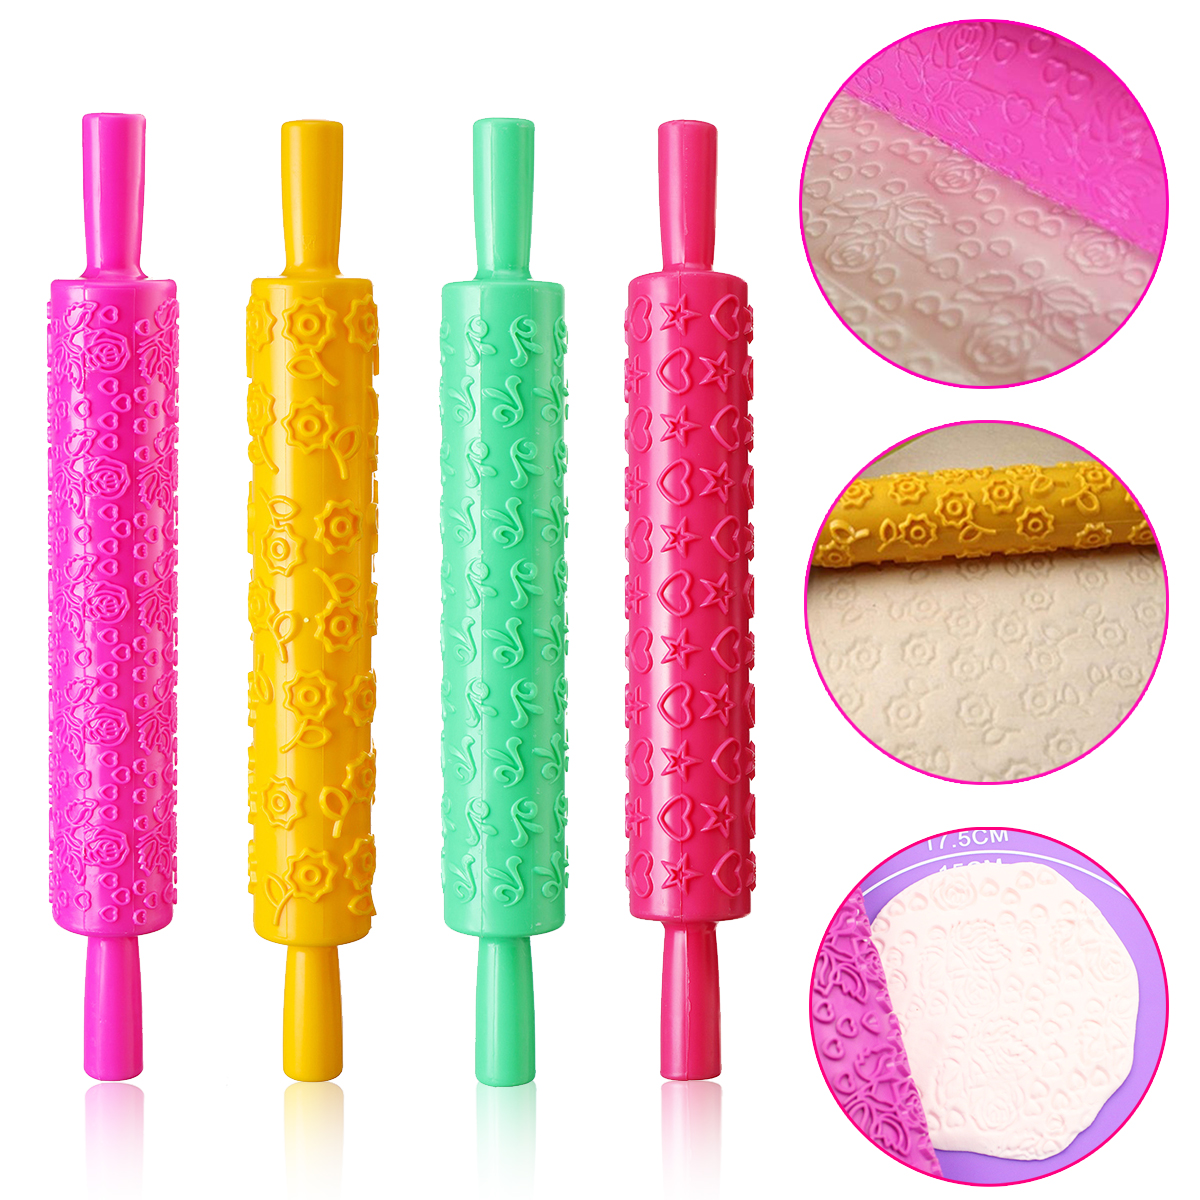 Baking-Rolling-Pin-Christmas-Creative-Baking-Biscuits-Cookie-Rolling-Rod-Pin-Printing-Mold-1410720-3